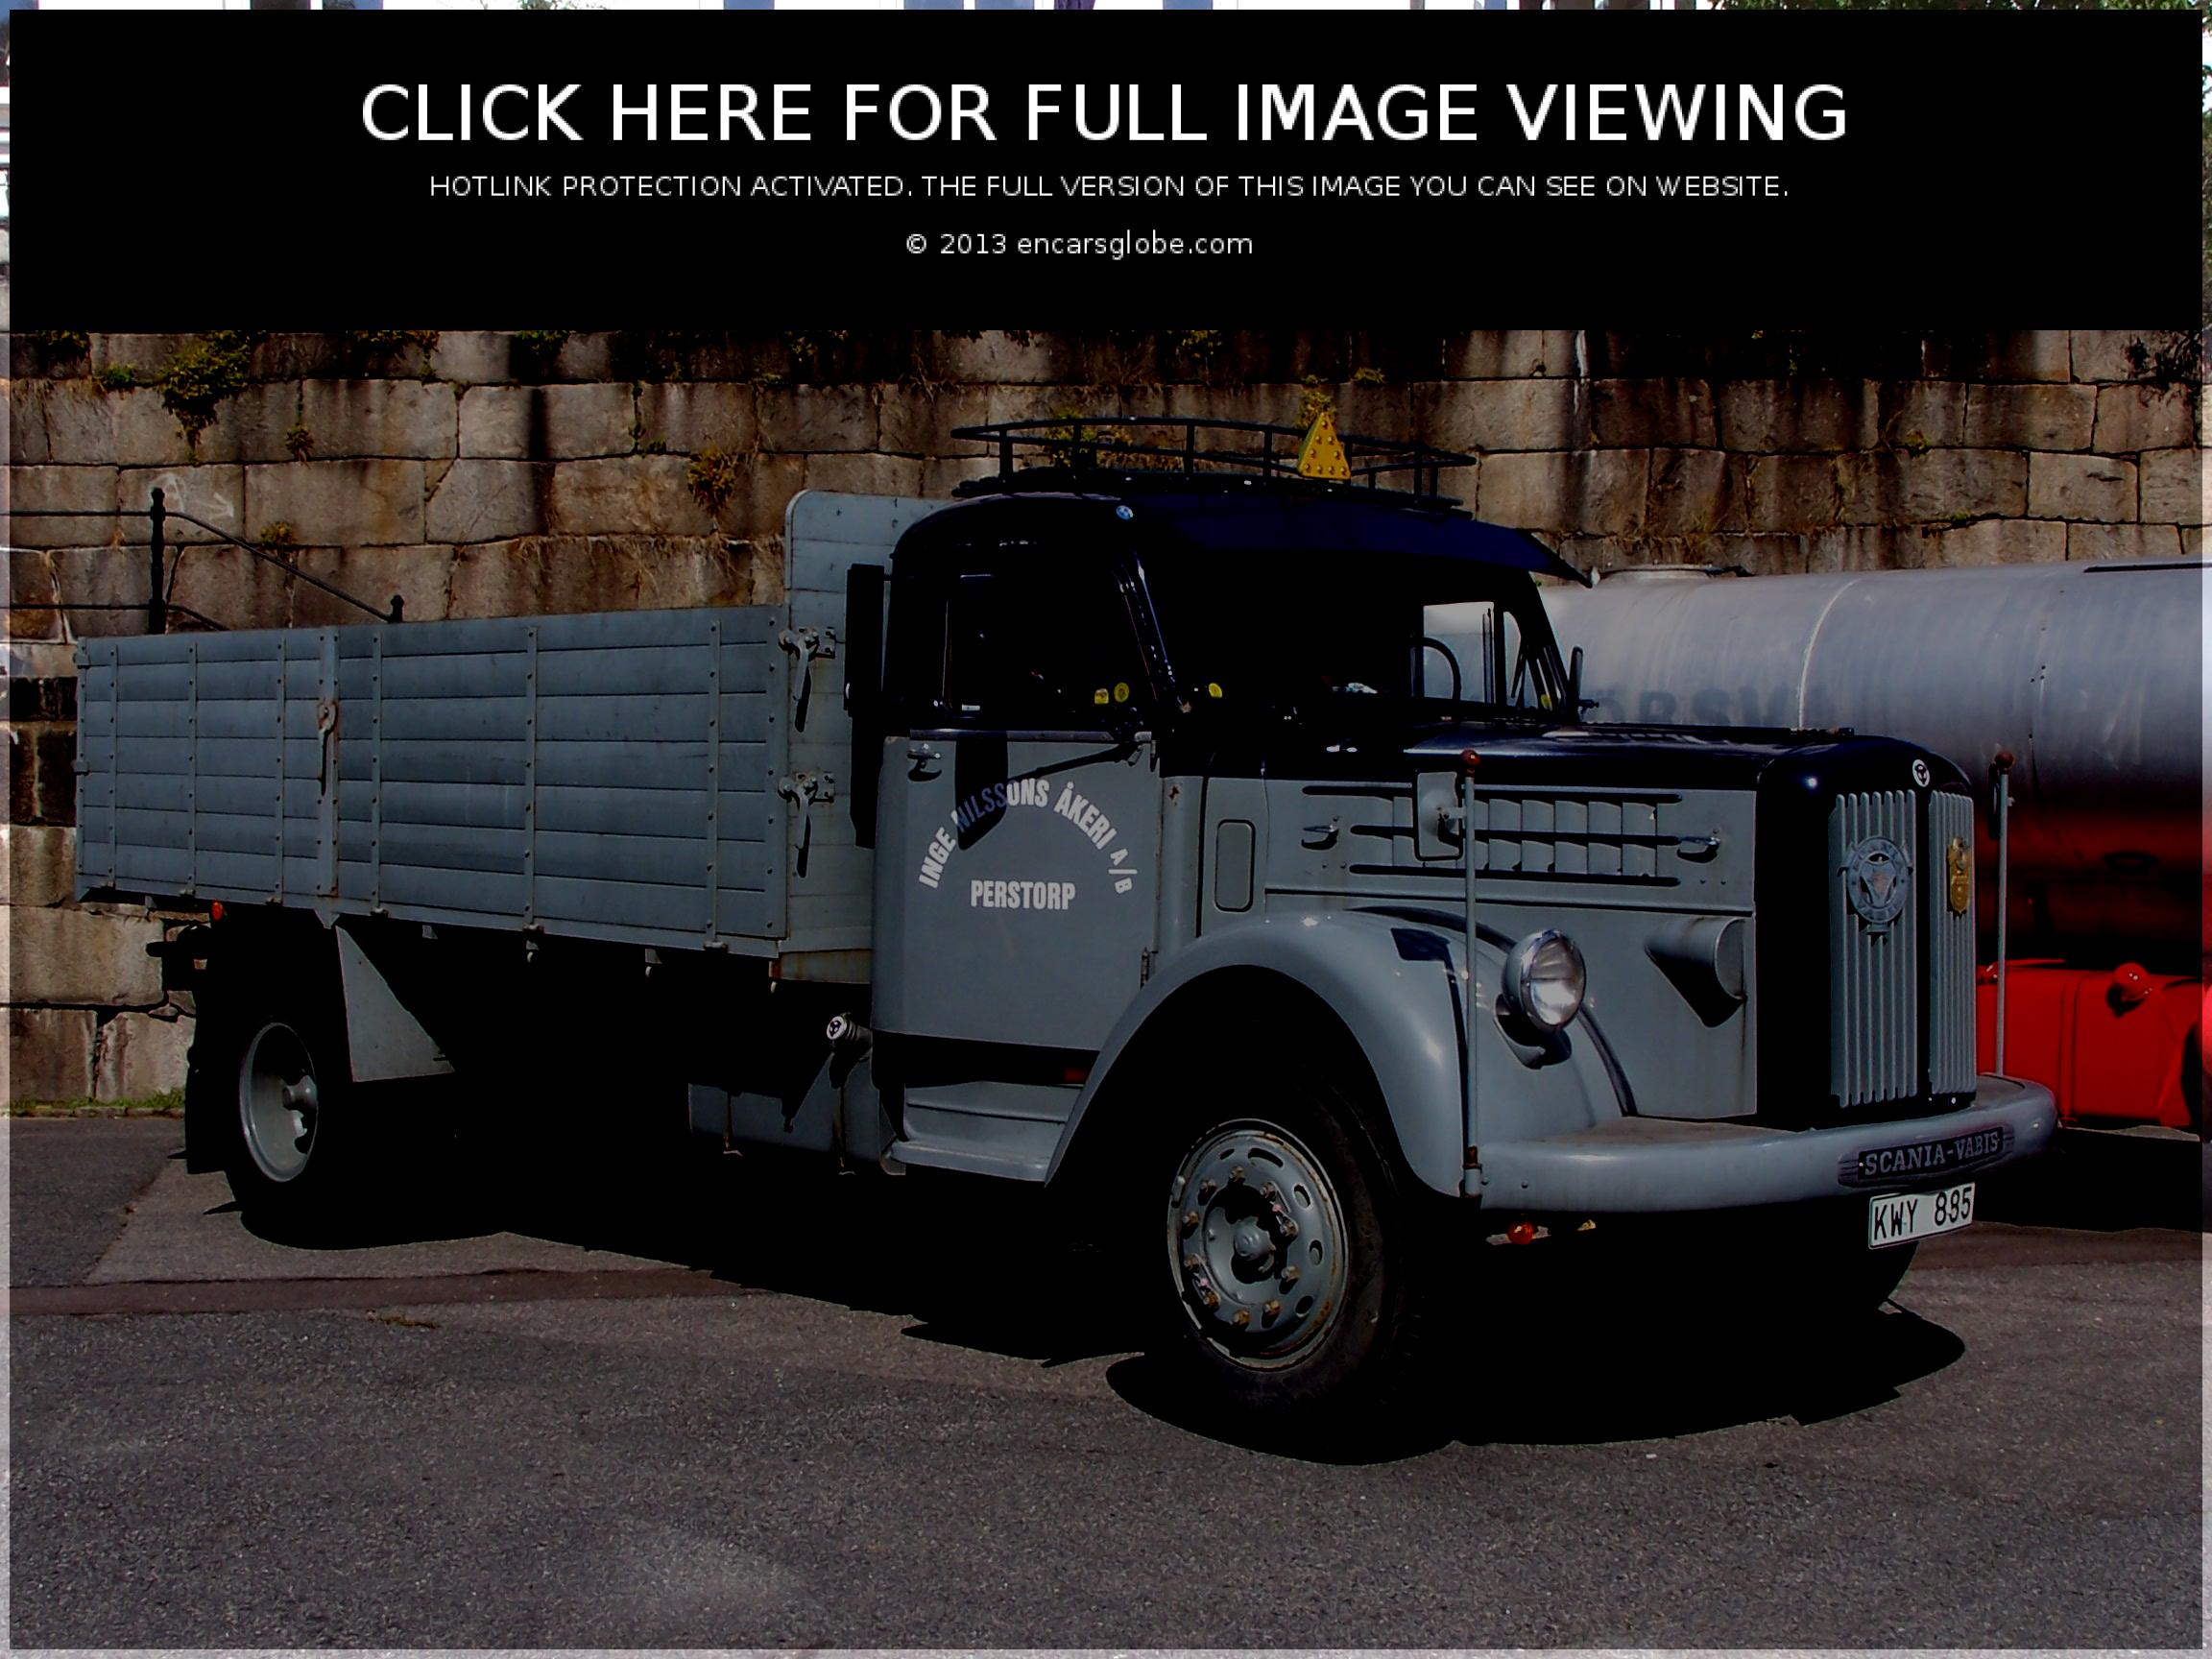 Scania-Vabis L71: Photo gallery, complete information about model ...